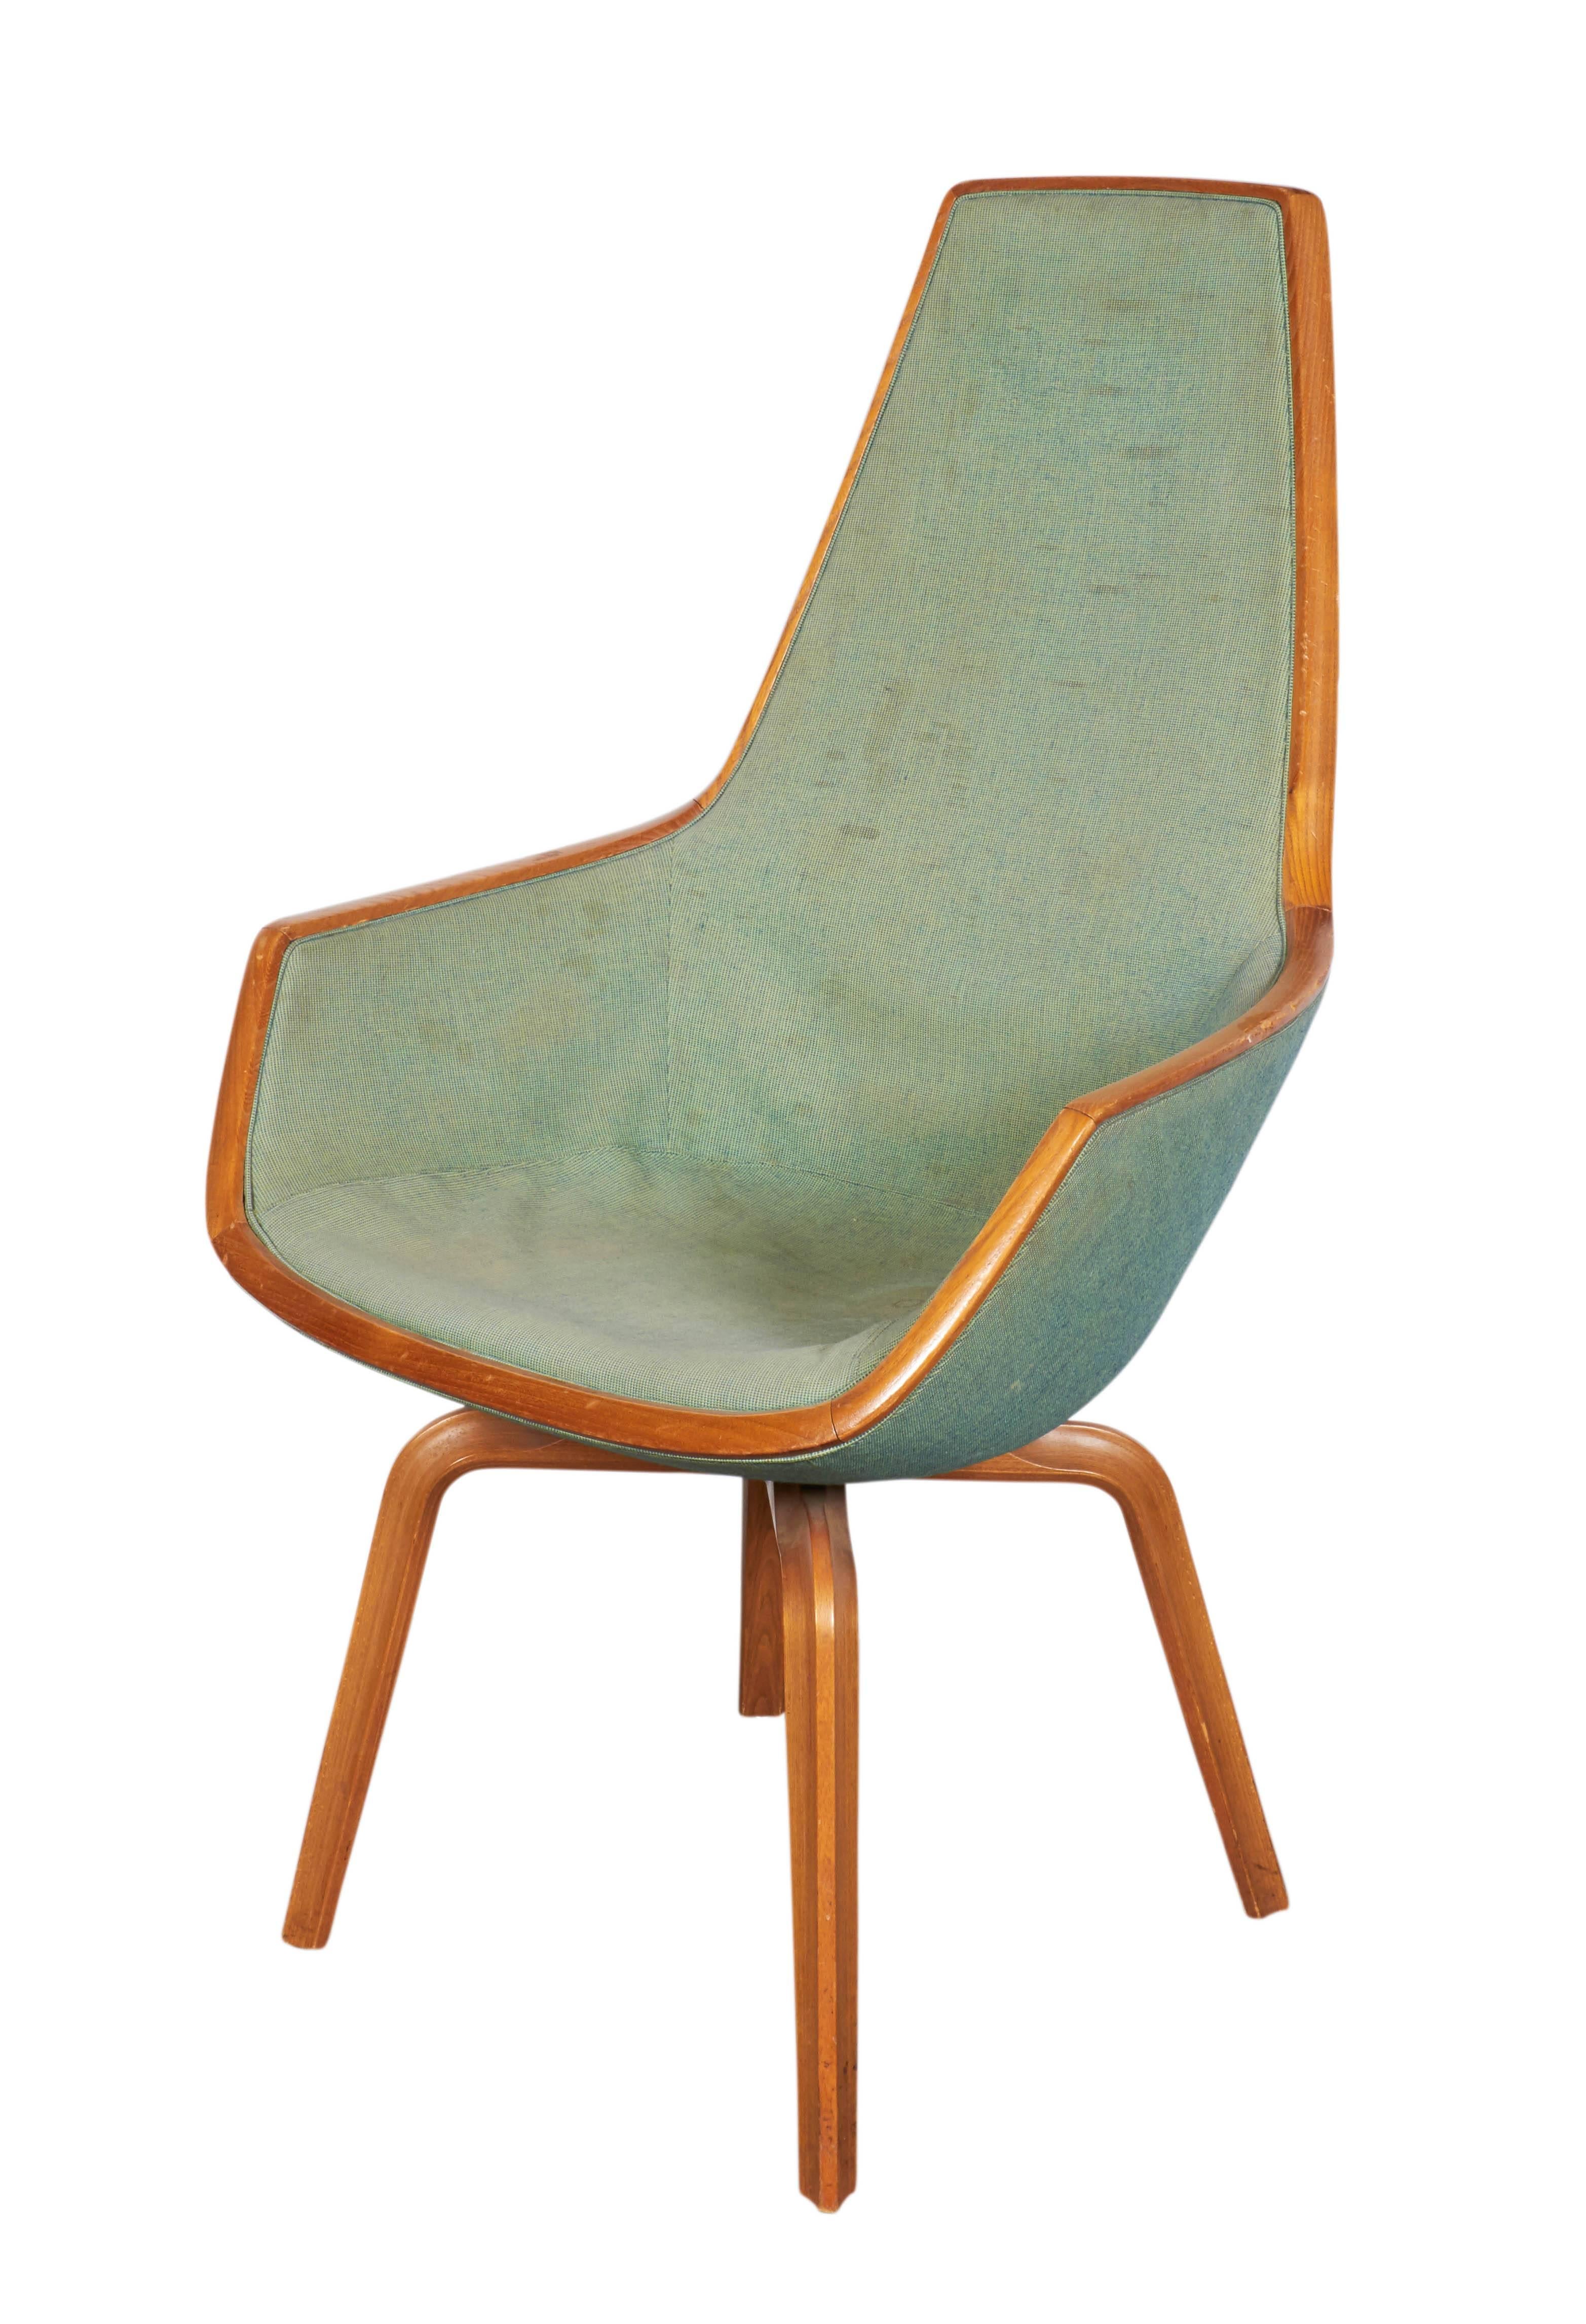 Vintage 1950s Modern Occasional Chairs

This pair of Arne Jacobsen Giraffe chairs are in structural excellence. The foam is crunchy, but our upholsterer suggests strongly that the fabric can be saved and reapplied if the foam were replaced. These